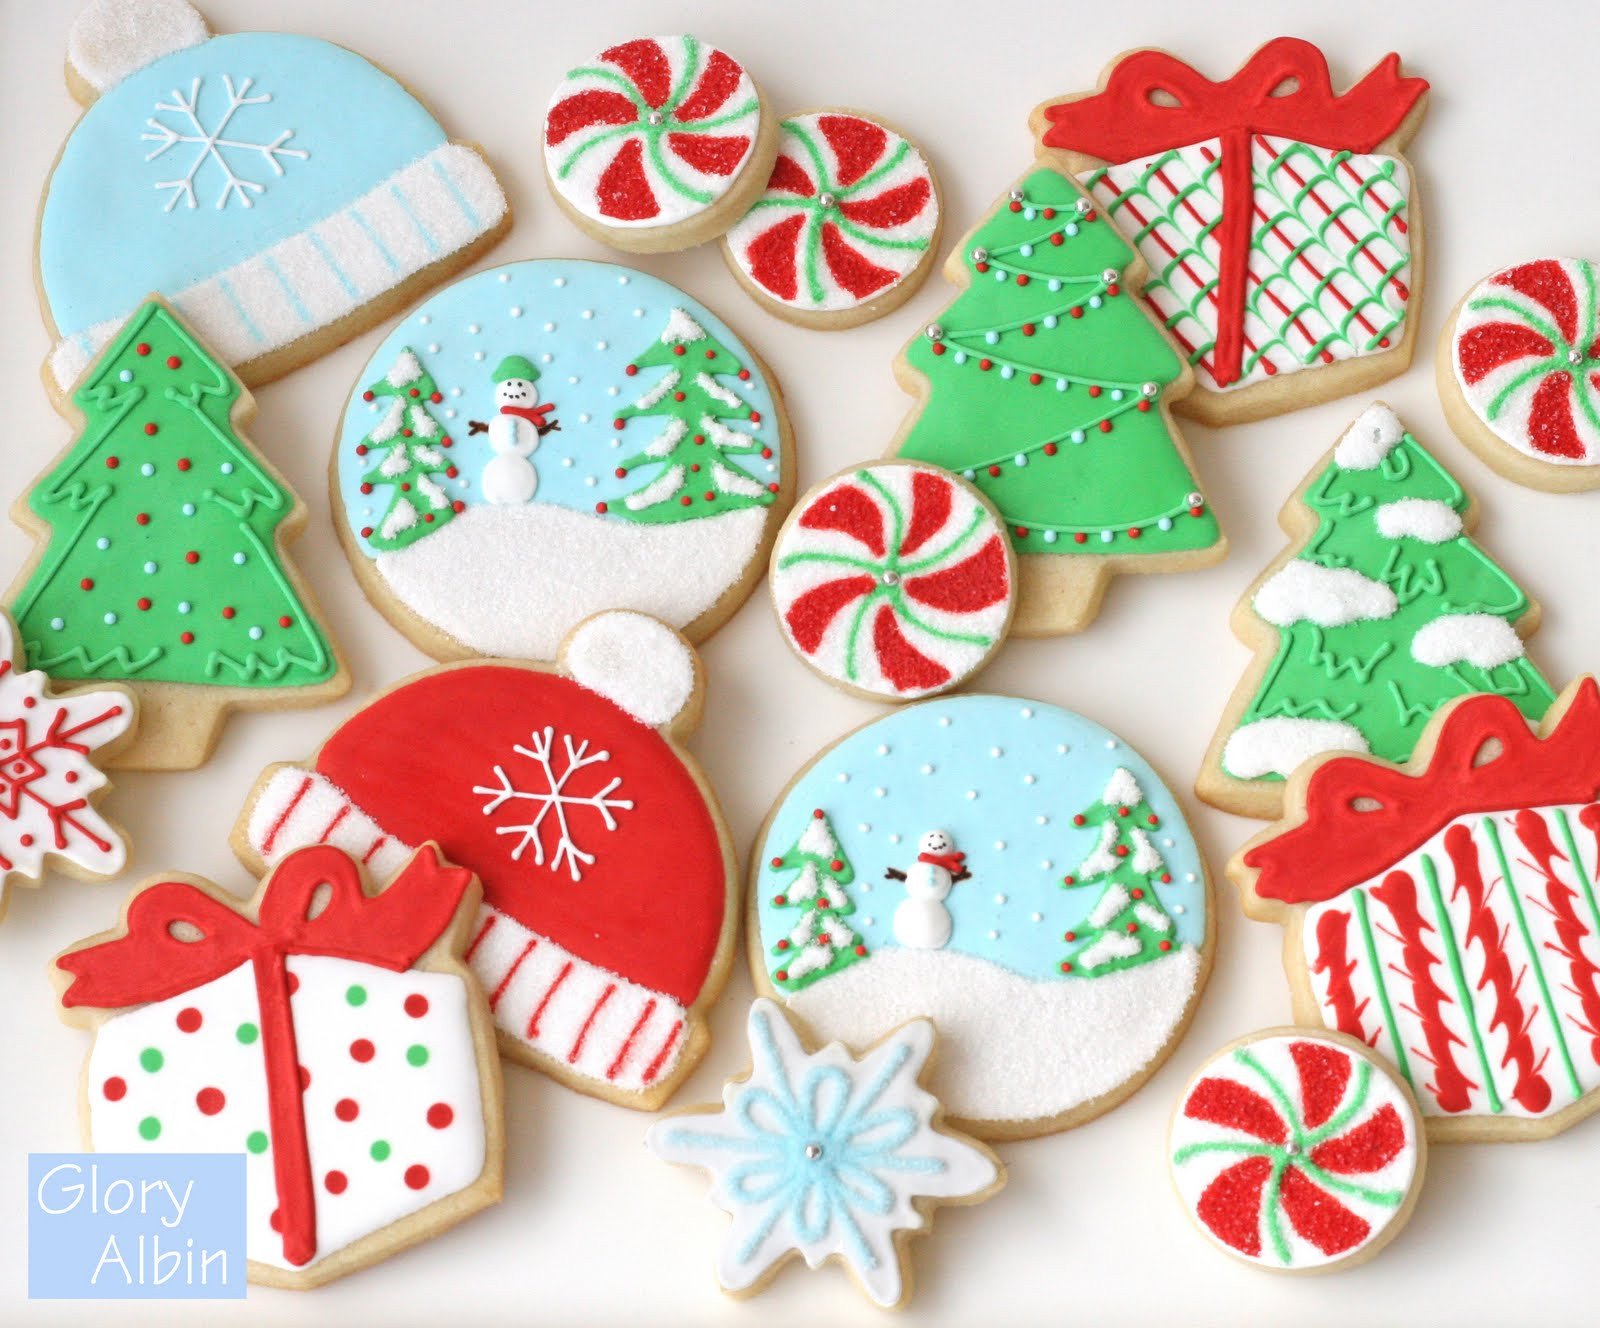 Icing For Christmas Cookies
 Decorating Sugar Cookies with Royal Icing – Glorious Treats